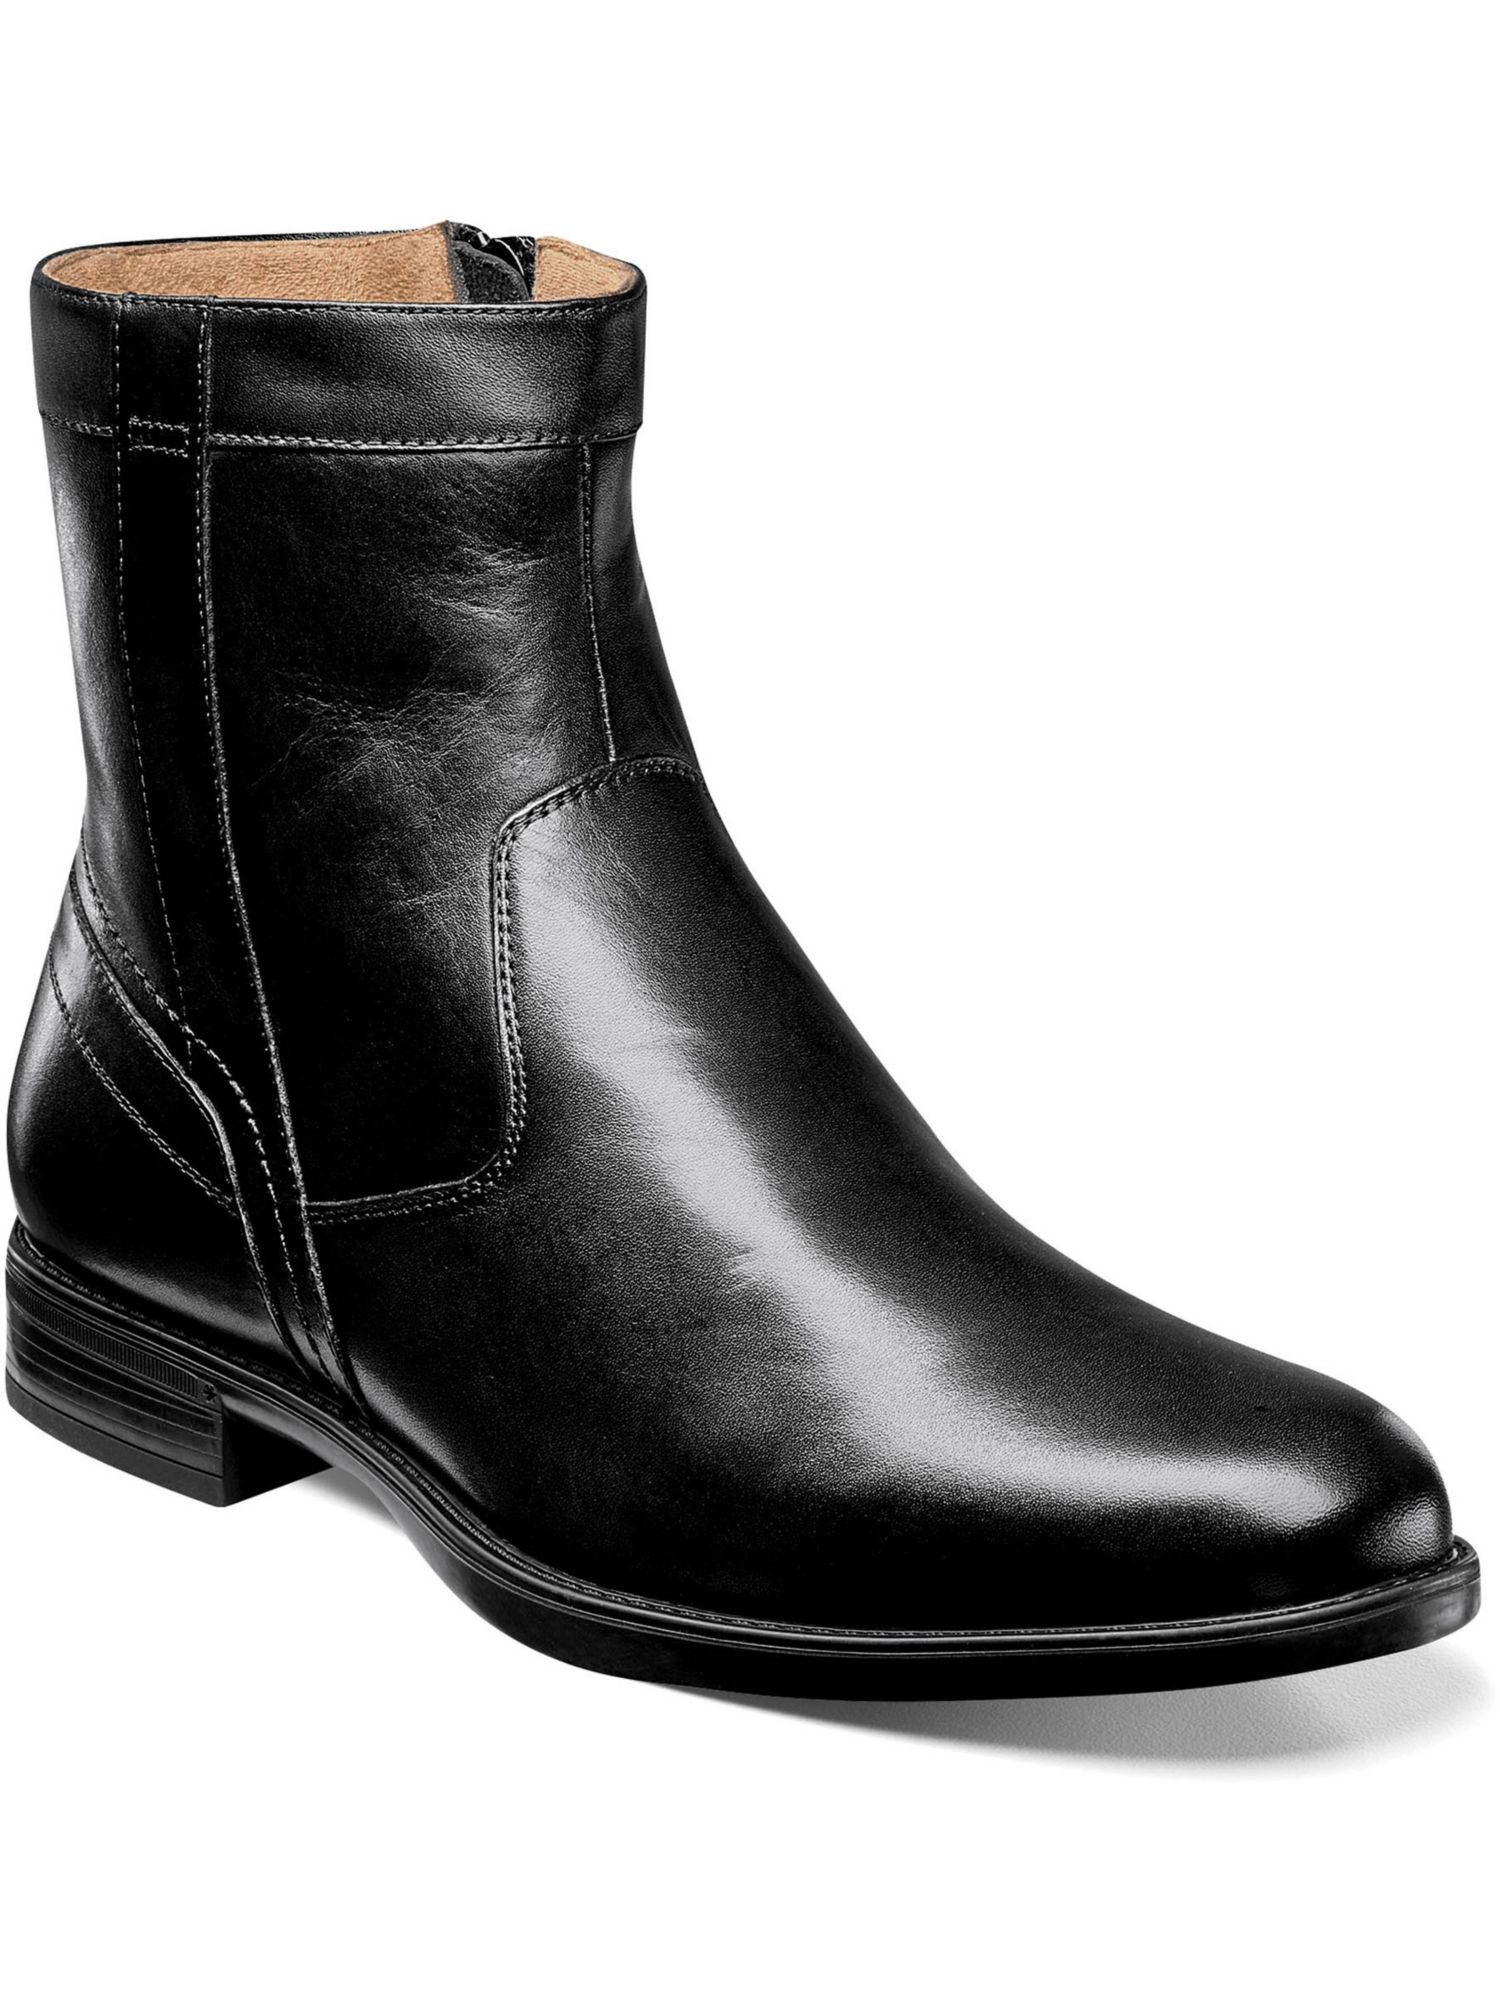 FLORSHEIM Mens Black Cushioned Removable Insole Midtown Round Toe Zip-Up Leather Boots Shoes 15 D